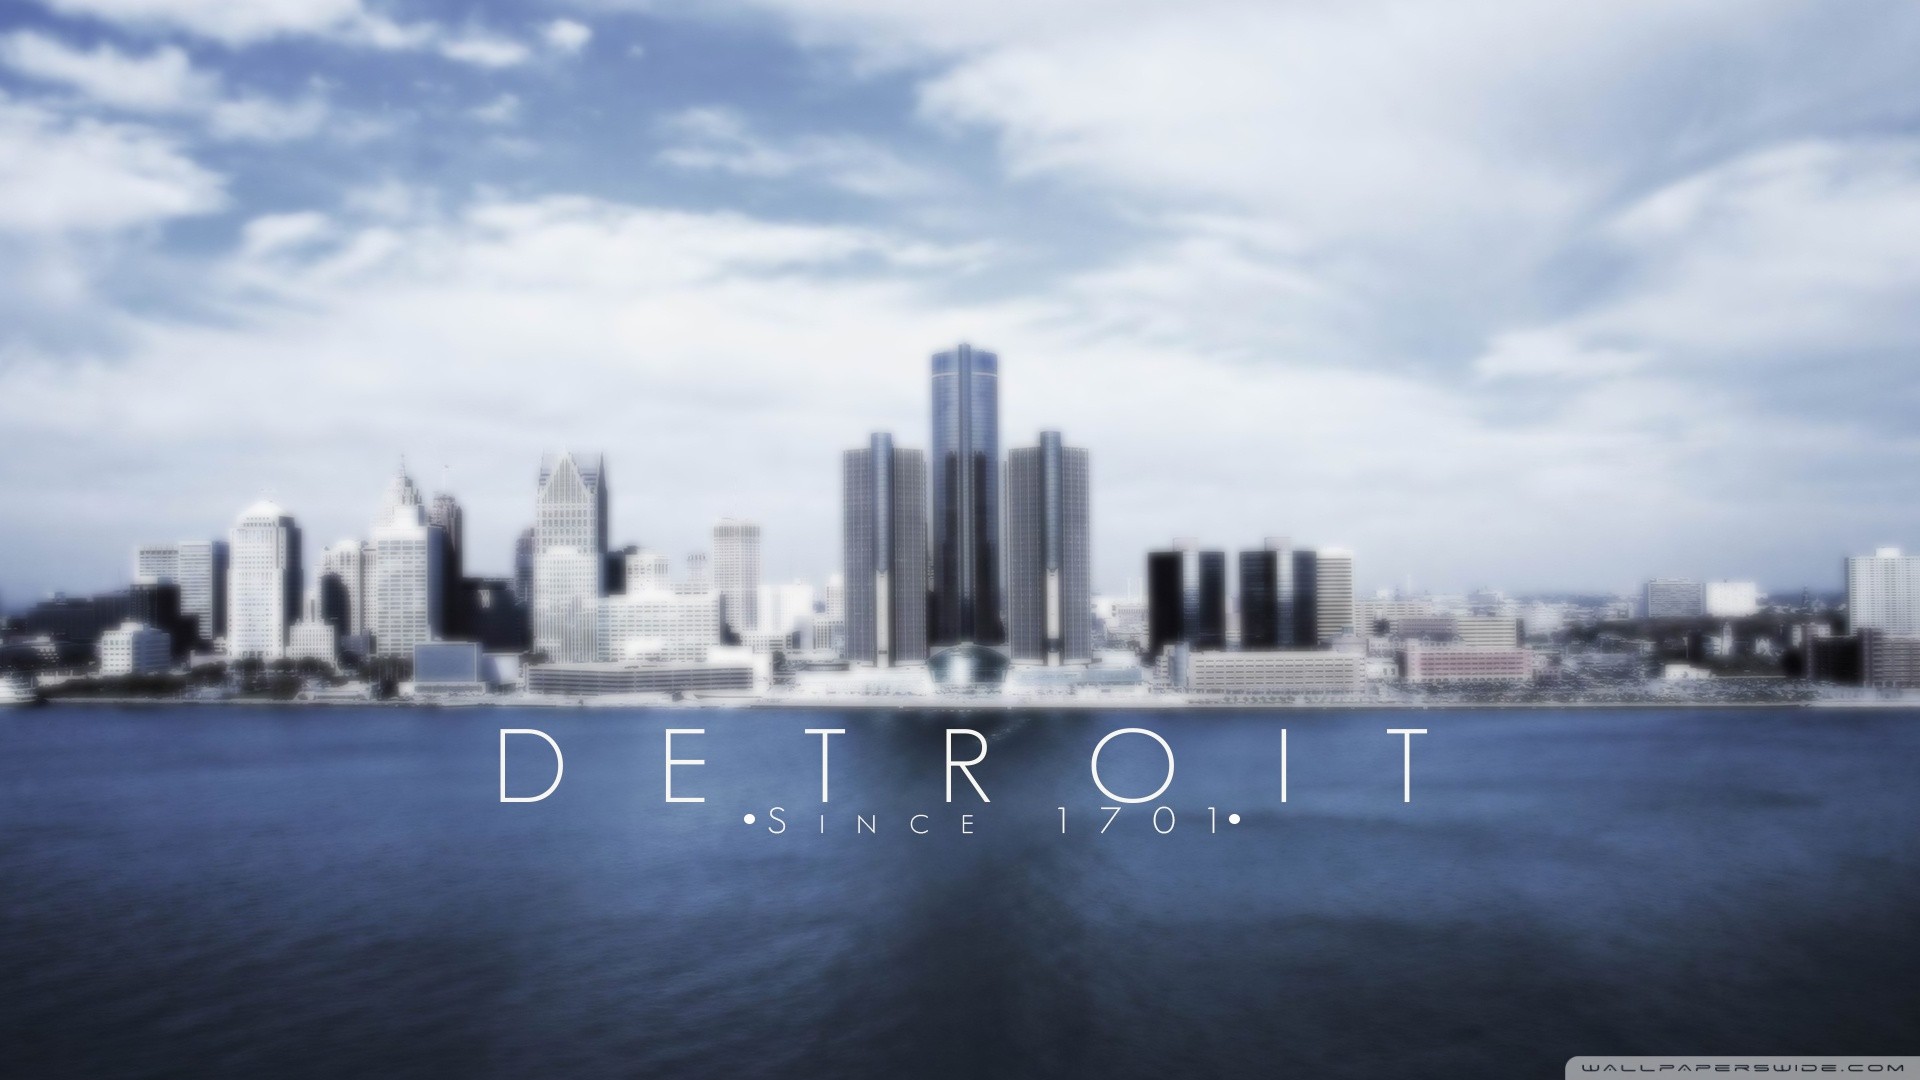 General 1920x1080 Detroit USA cityscape watermarked